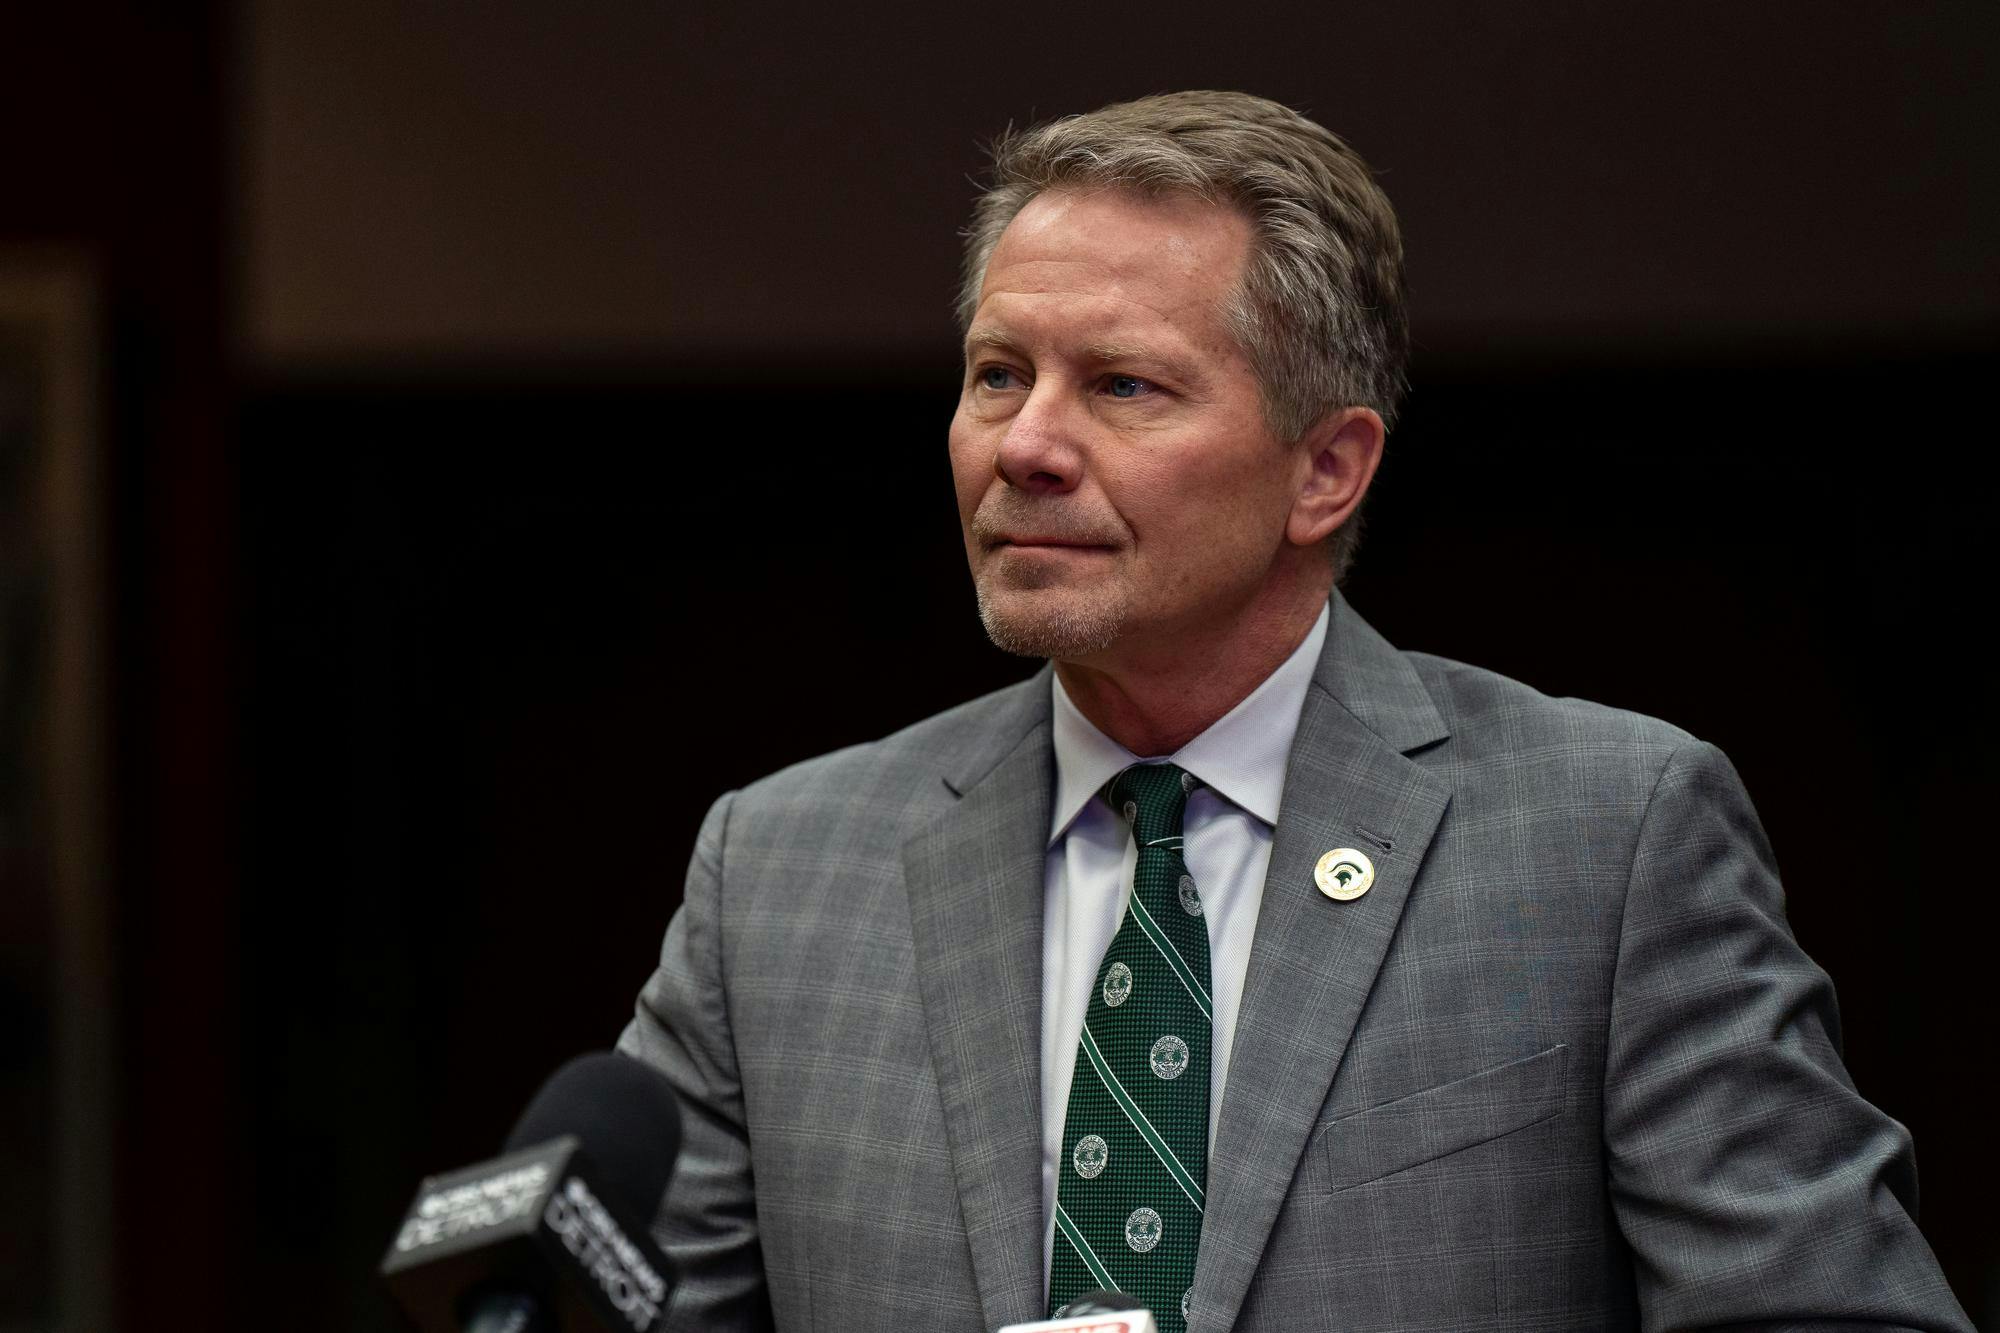 MSU President-elect Kevin Guskiewicz speaking with the media at the Hannah Administration Building on Dec. 11, 2023.  This was a chance for the media to meet Guskiewicz as he prepares to take the role of Michigan State University’s president on March 4, 2024.